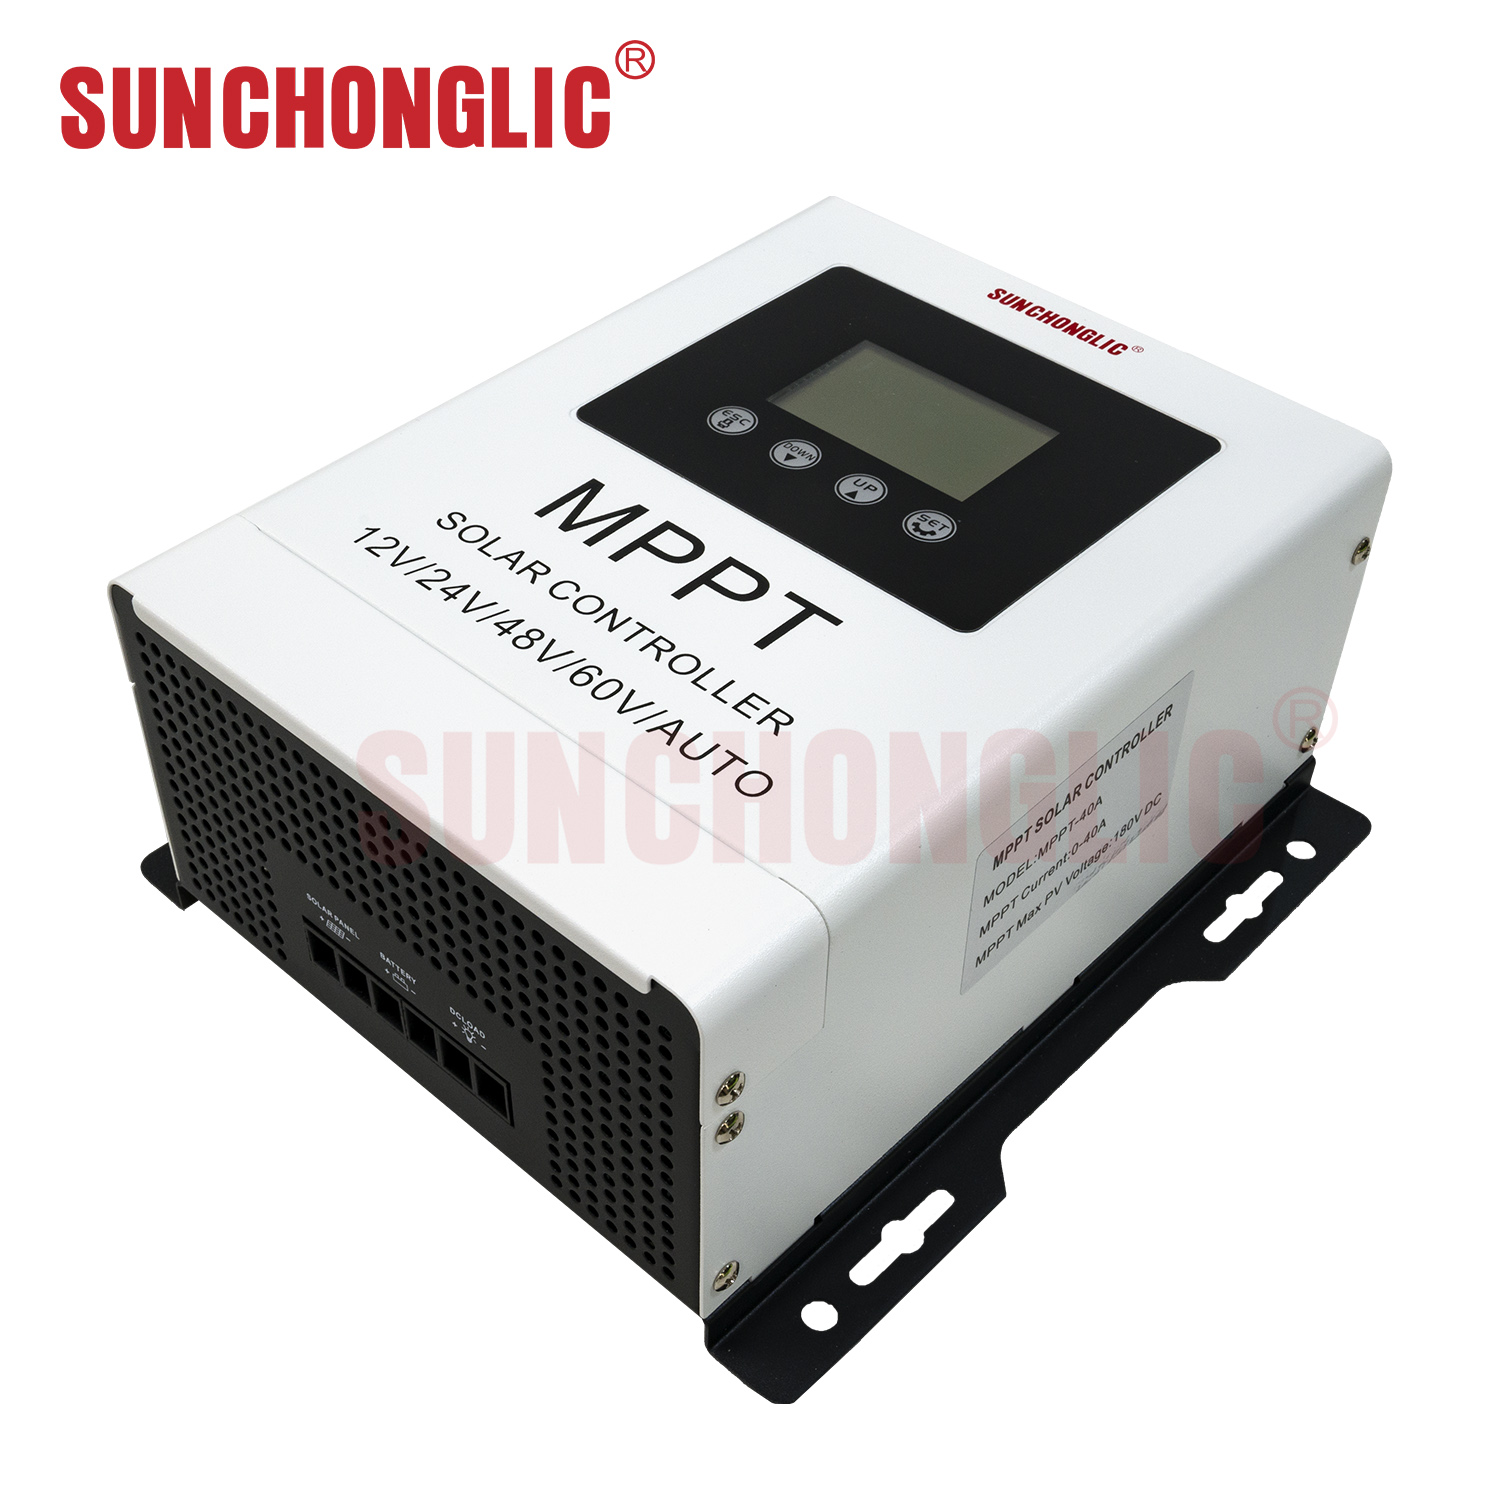 MPPT Solar Charge Controller - MPPT-40A